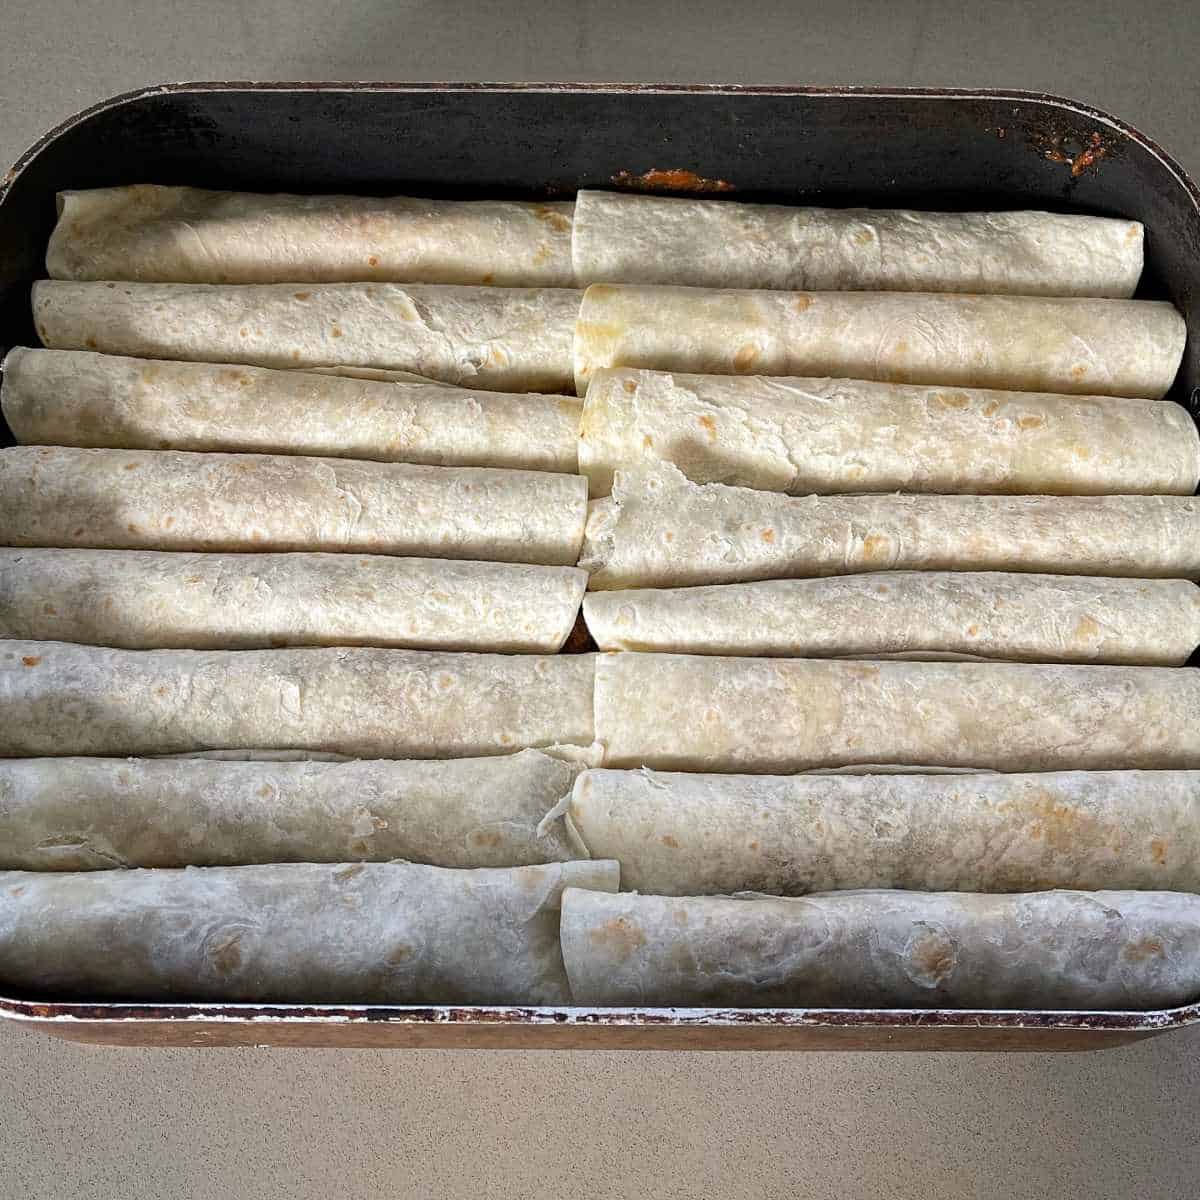 Beef enchiladas being prepared in a large tray